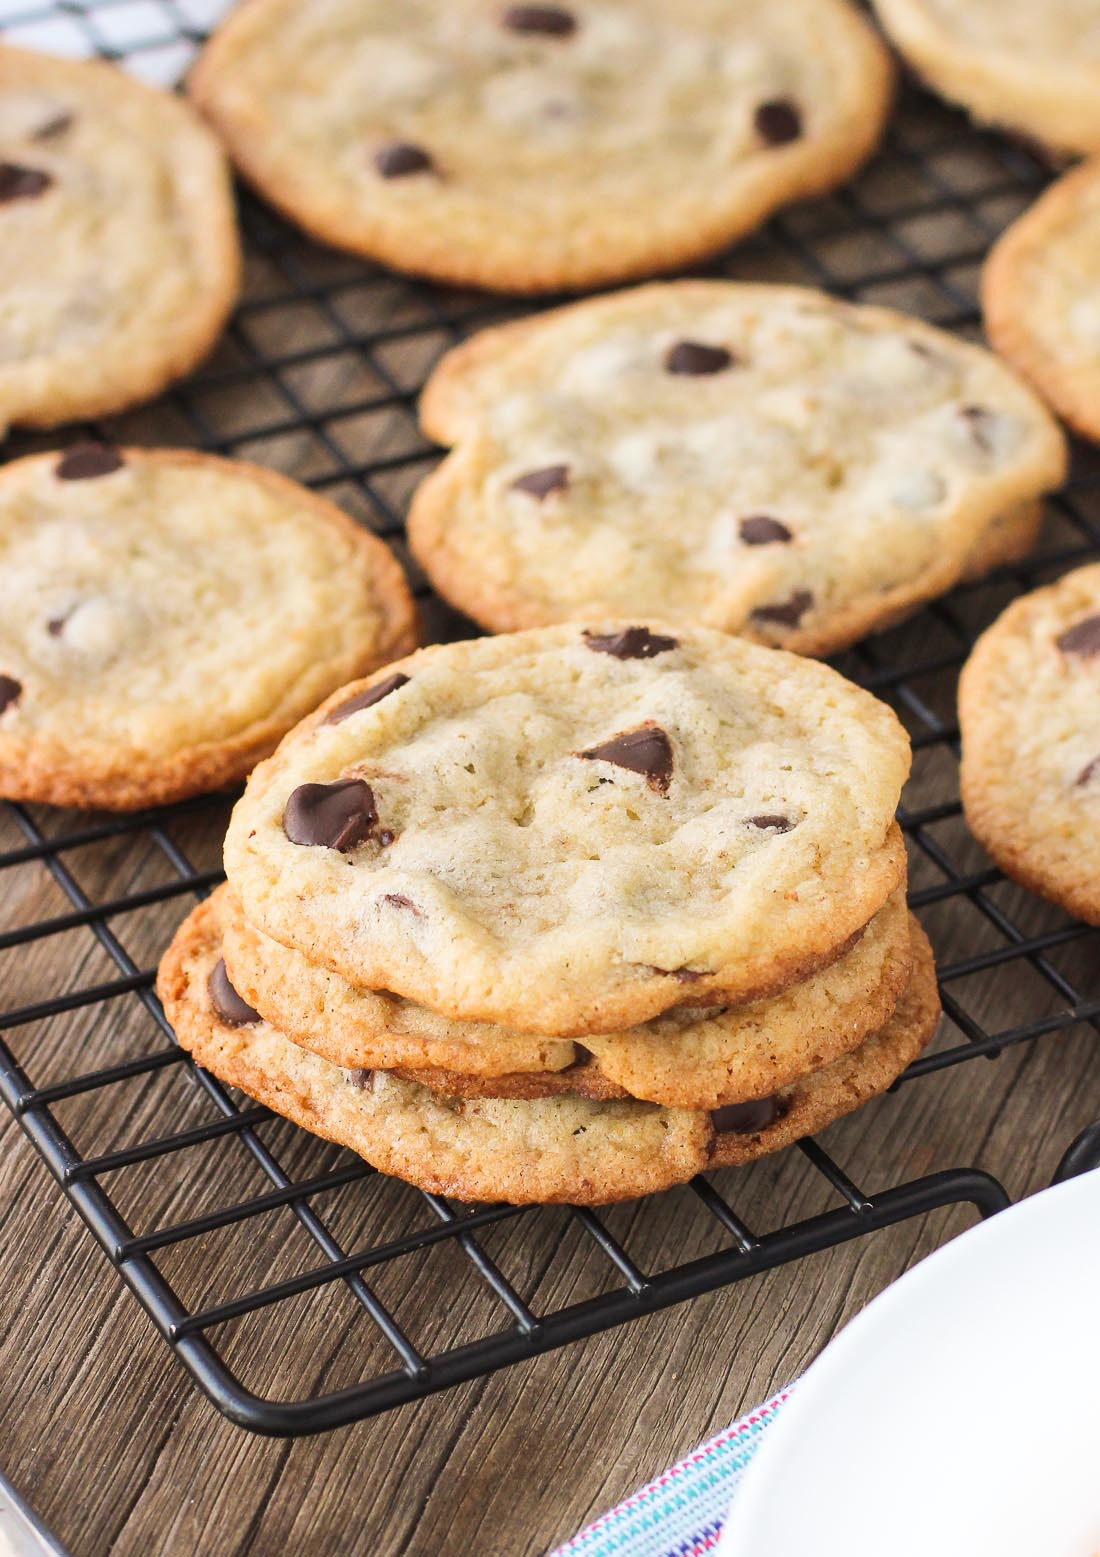 Bisquick Chocolate Chip Cookies
 Thin and Chewy Chocolate Chip Cookies with Bisquick